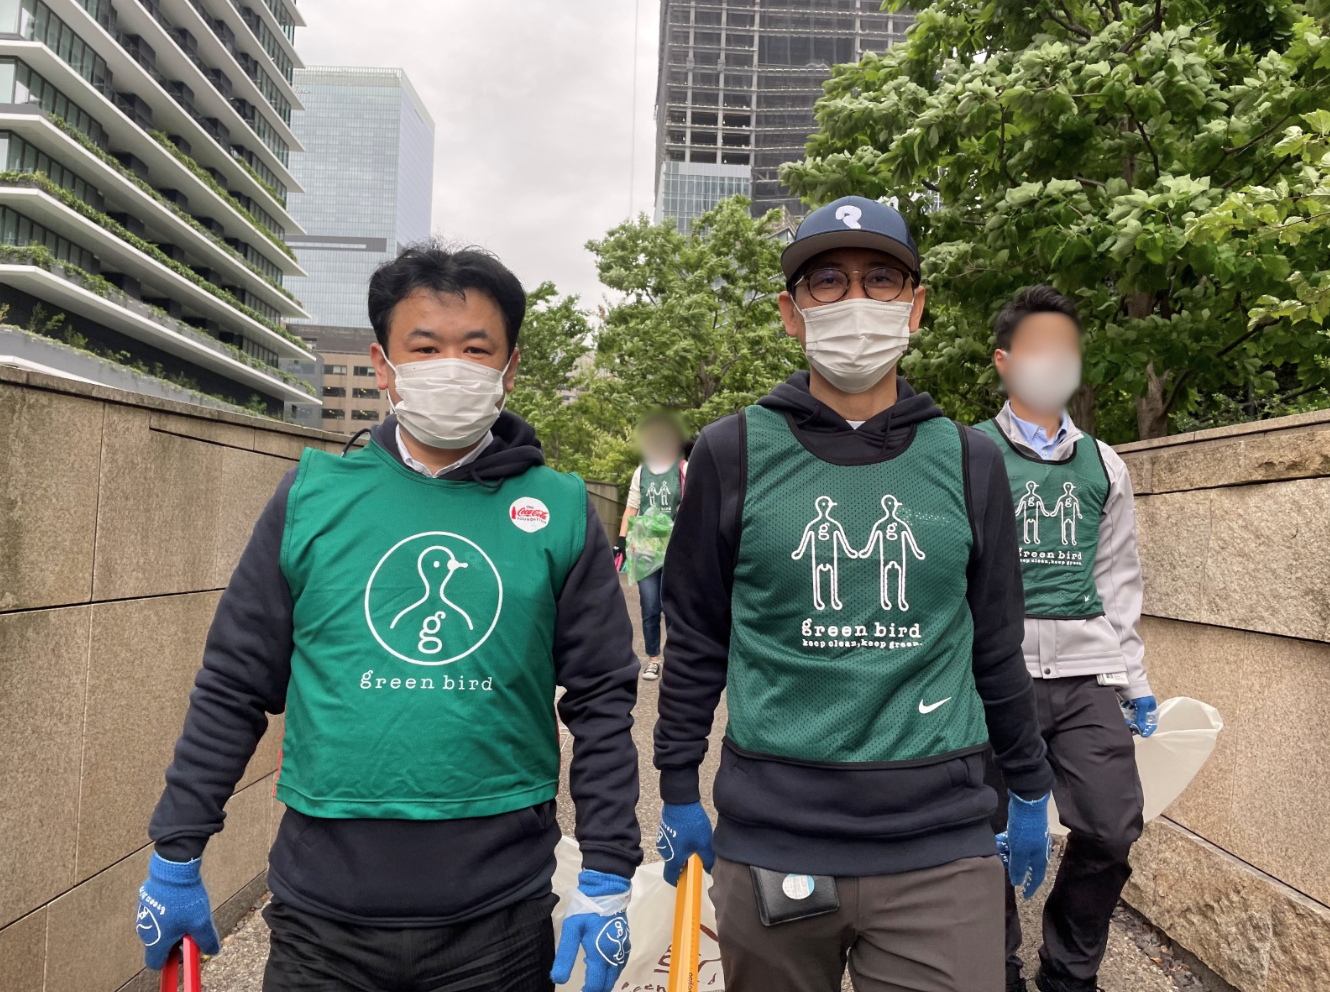 Shuichi Horioka, Client Director, and Gang Pei, Head of North Asia, are on a mission to clean Tokyo